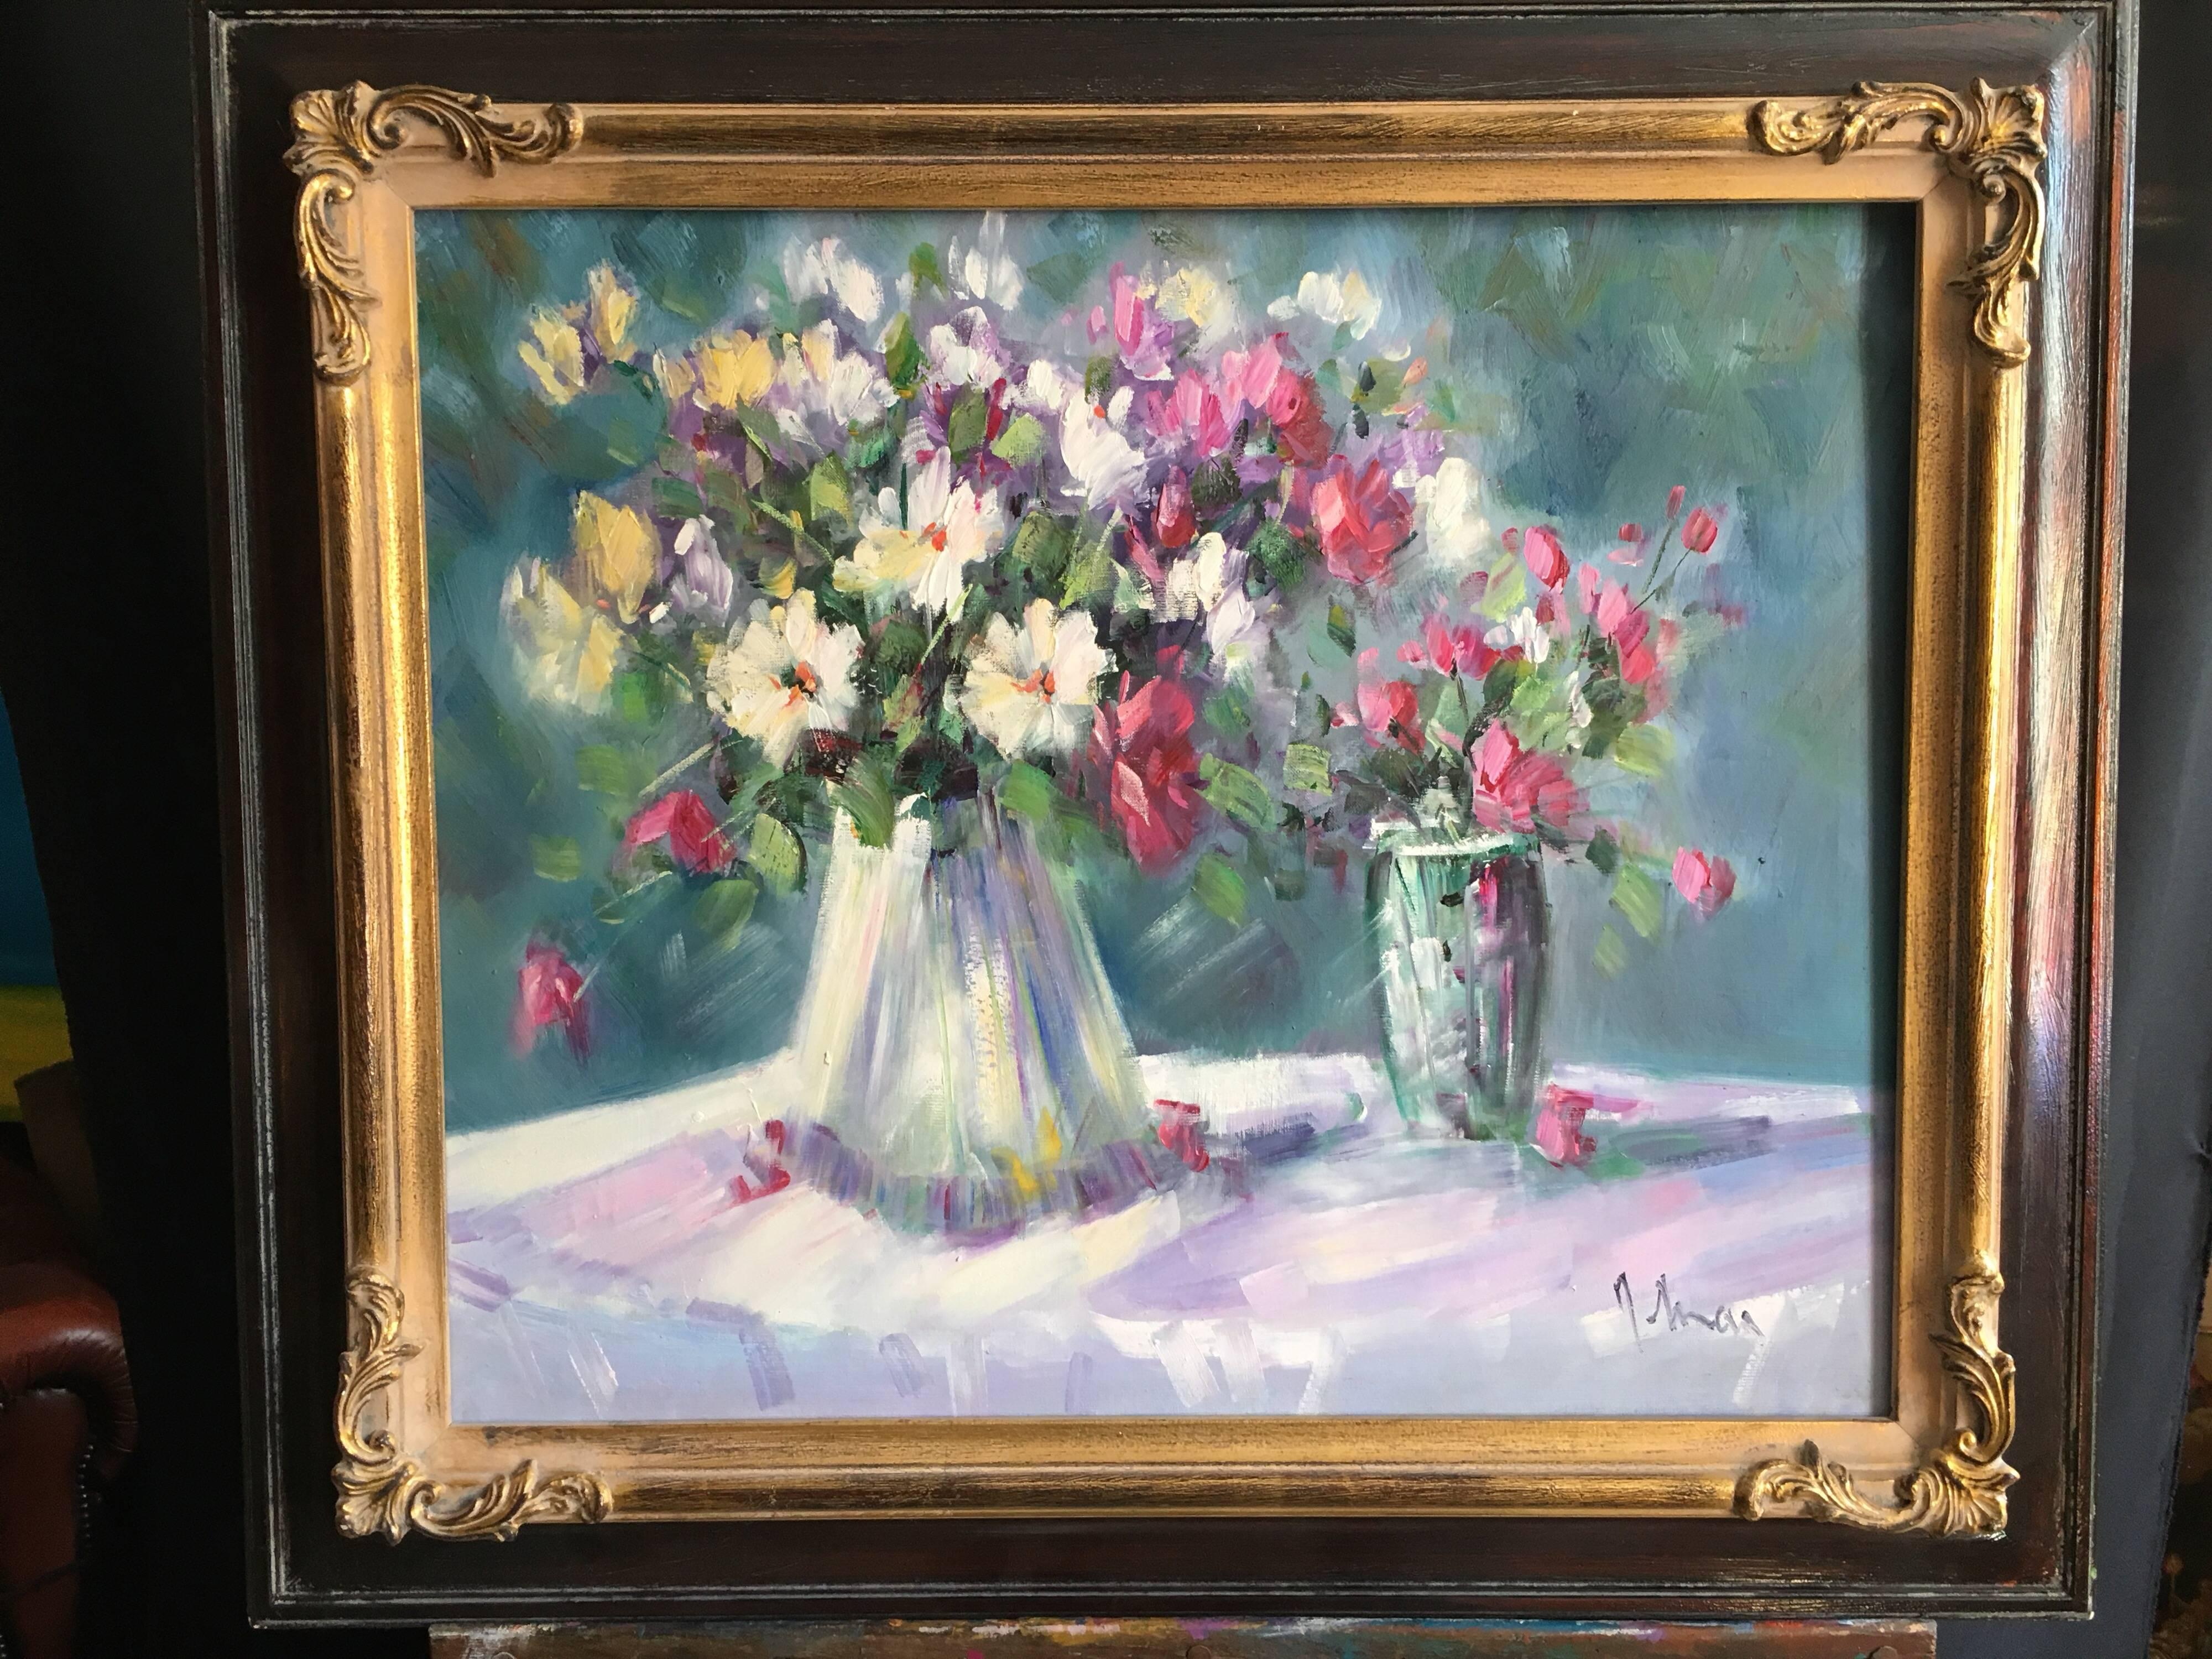 Floral Still Life, Oil Painting, Signed
By German artist, 20th Century
Signed by the artist, although it is hard to decipher, on the right hand corner
Oil painting on canvas, framed
Frame size: 26 x 29.5 inches

Fresh and colourful oil painting of